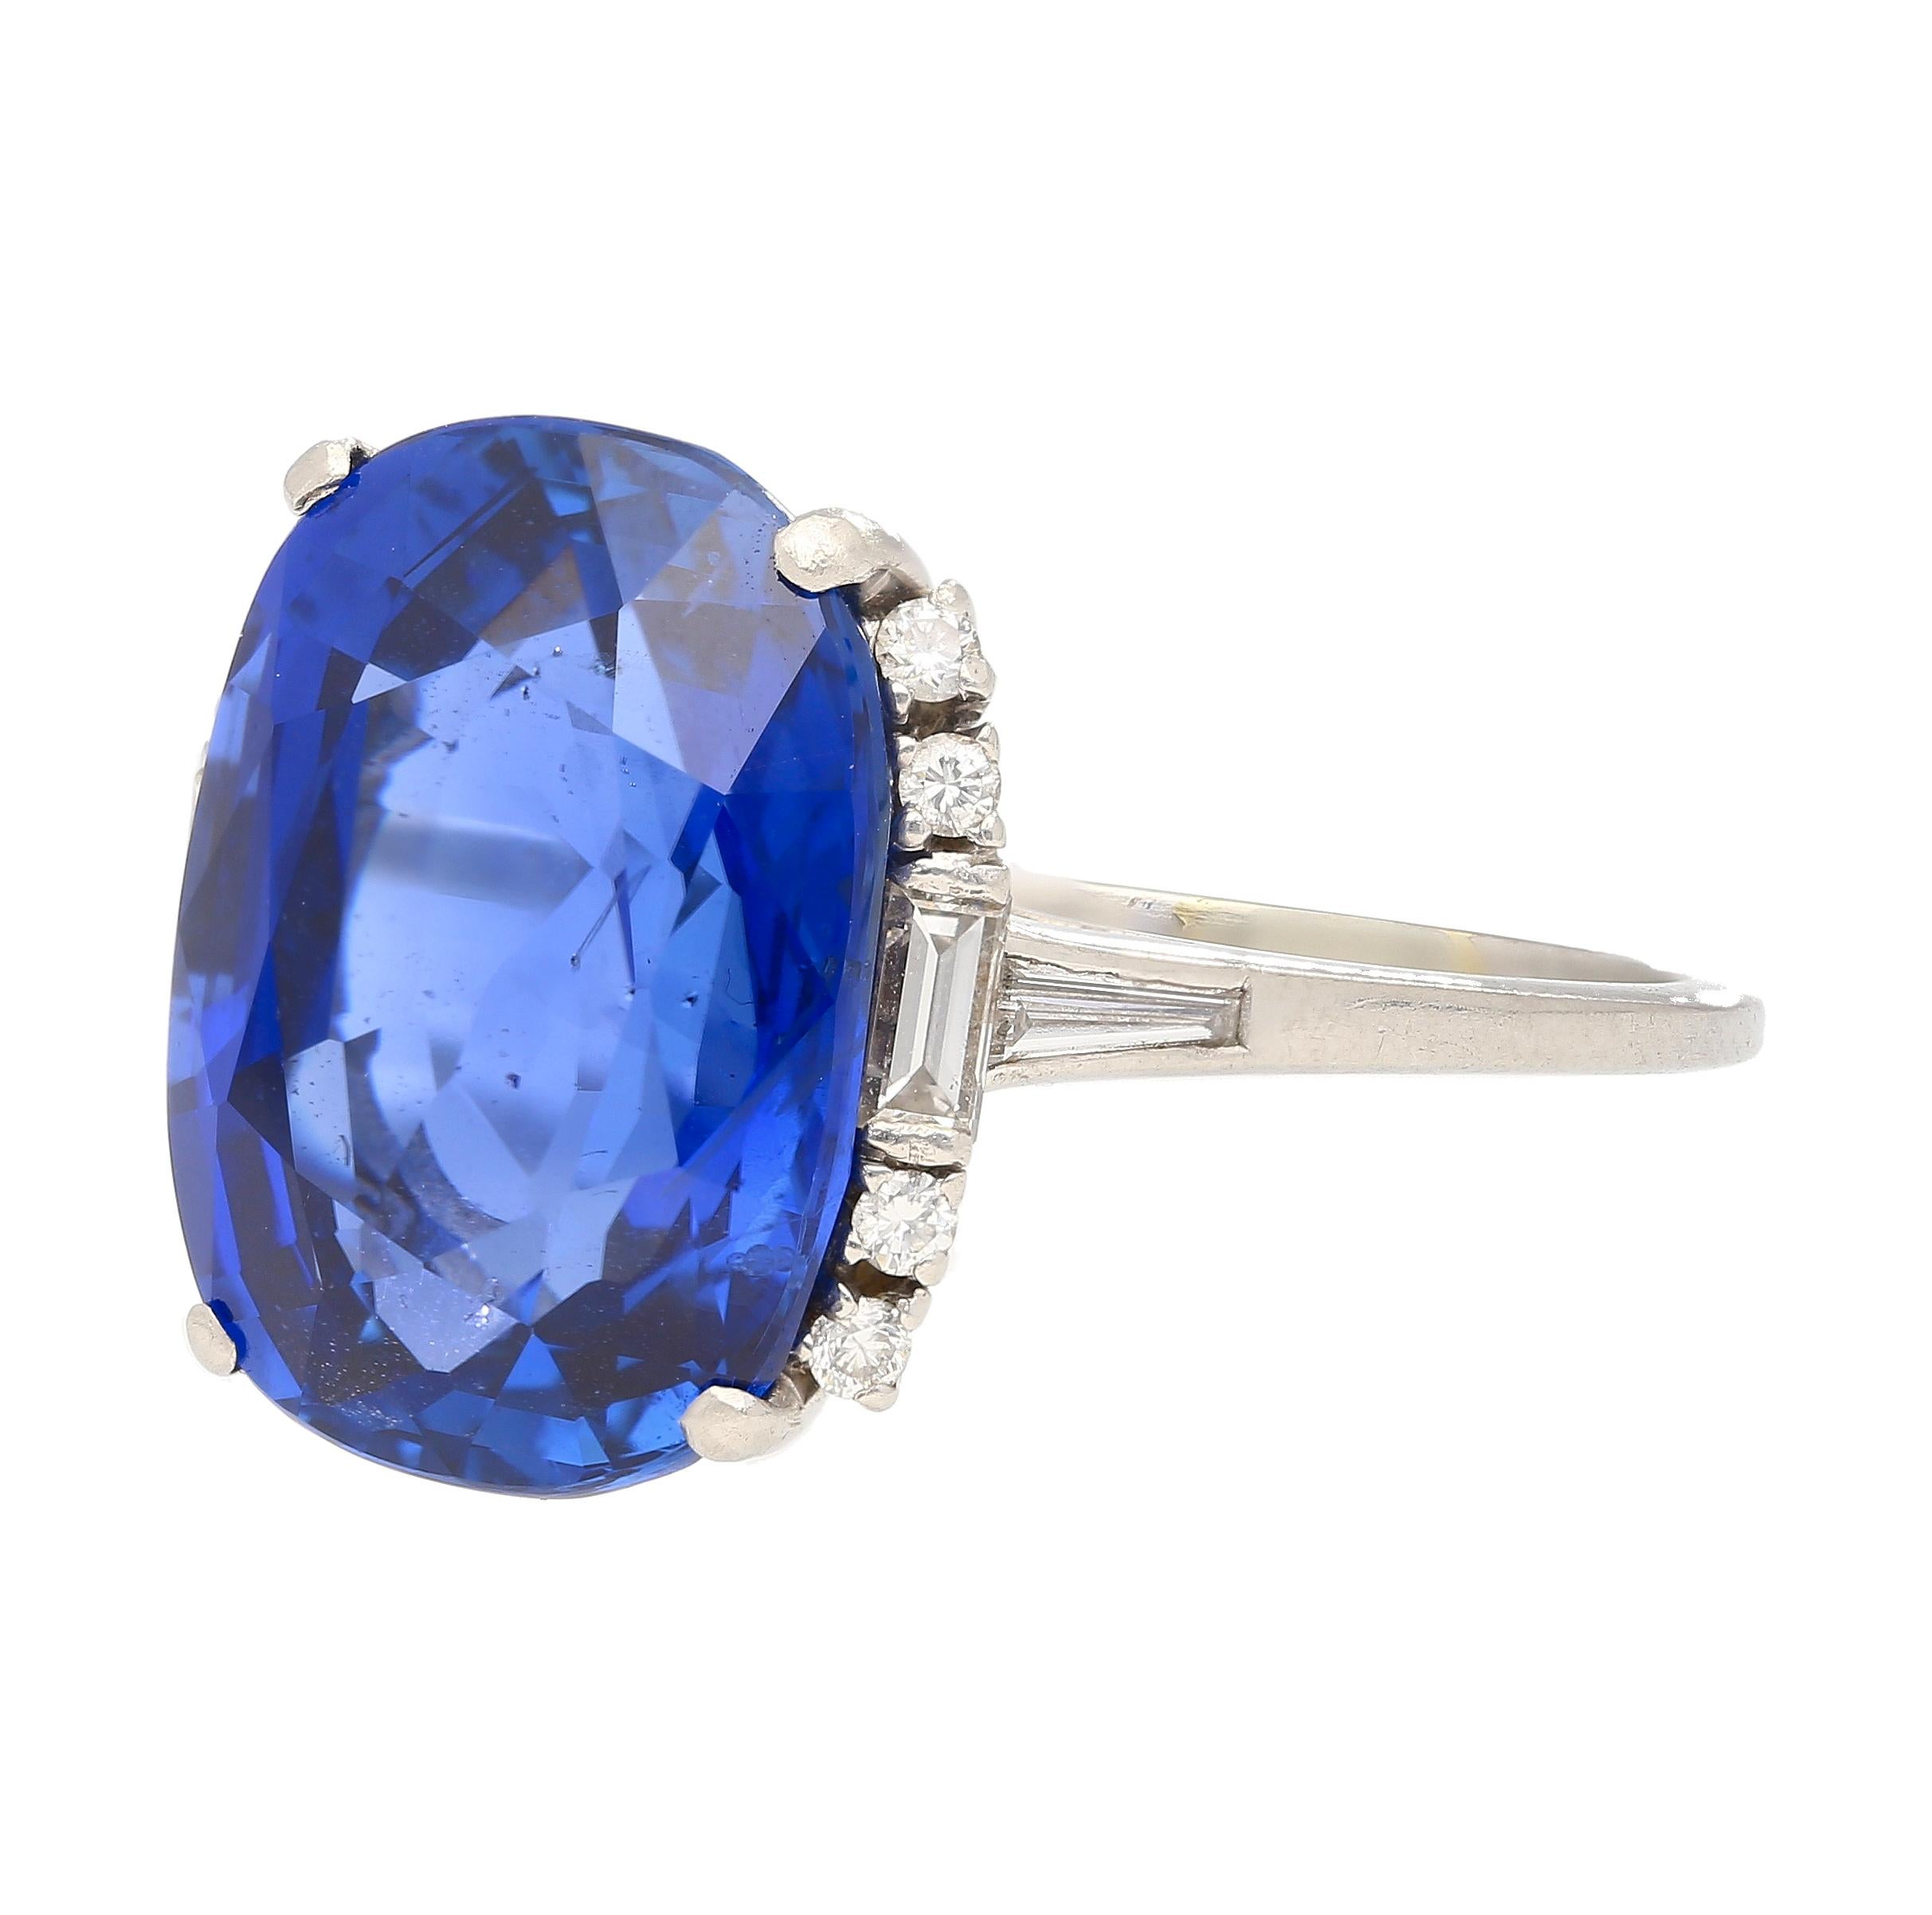 Centering an 11.63 Carat Royal Blue Burma (Myanmar) Sapphire, accented by Round-Brilliant Cut Diamonds, and set in Platinum, this treasure exemplifies the quality and craftsmanship of the famed Art Deco Era.

The center stone is a true miracle of